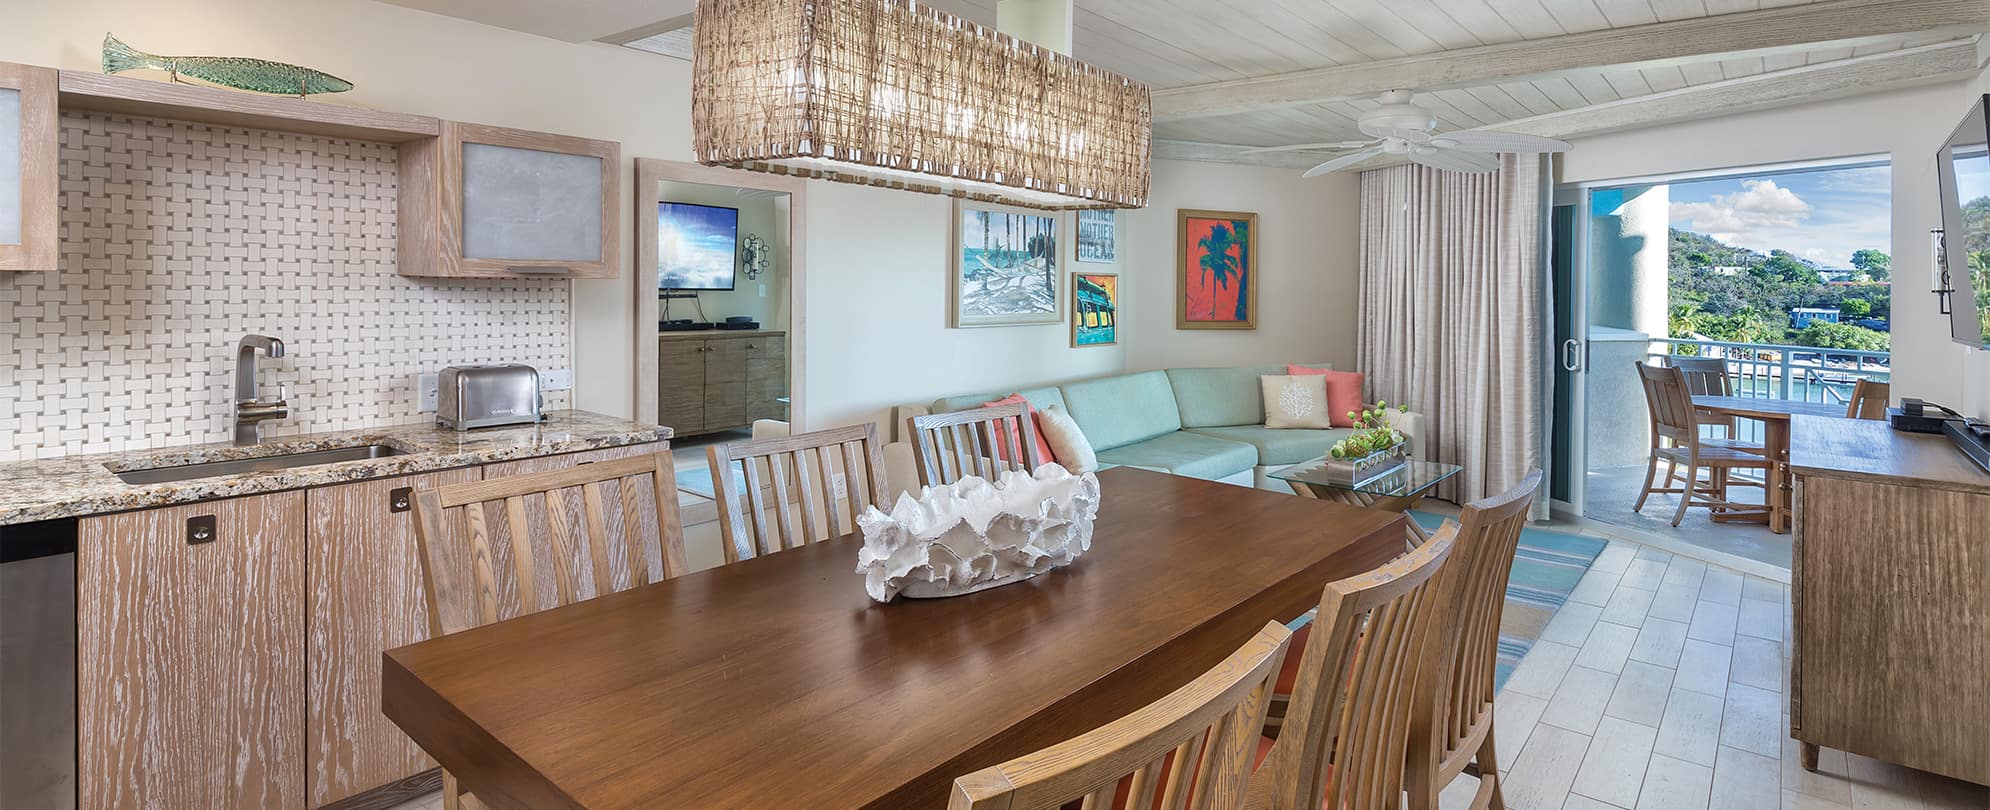 Dining room table, living room, and balcony of a Presidential Reserve suite at Margaritaville Vacation Club resort in St. Thomas.